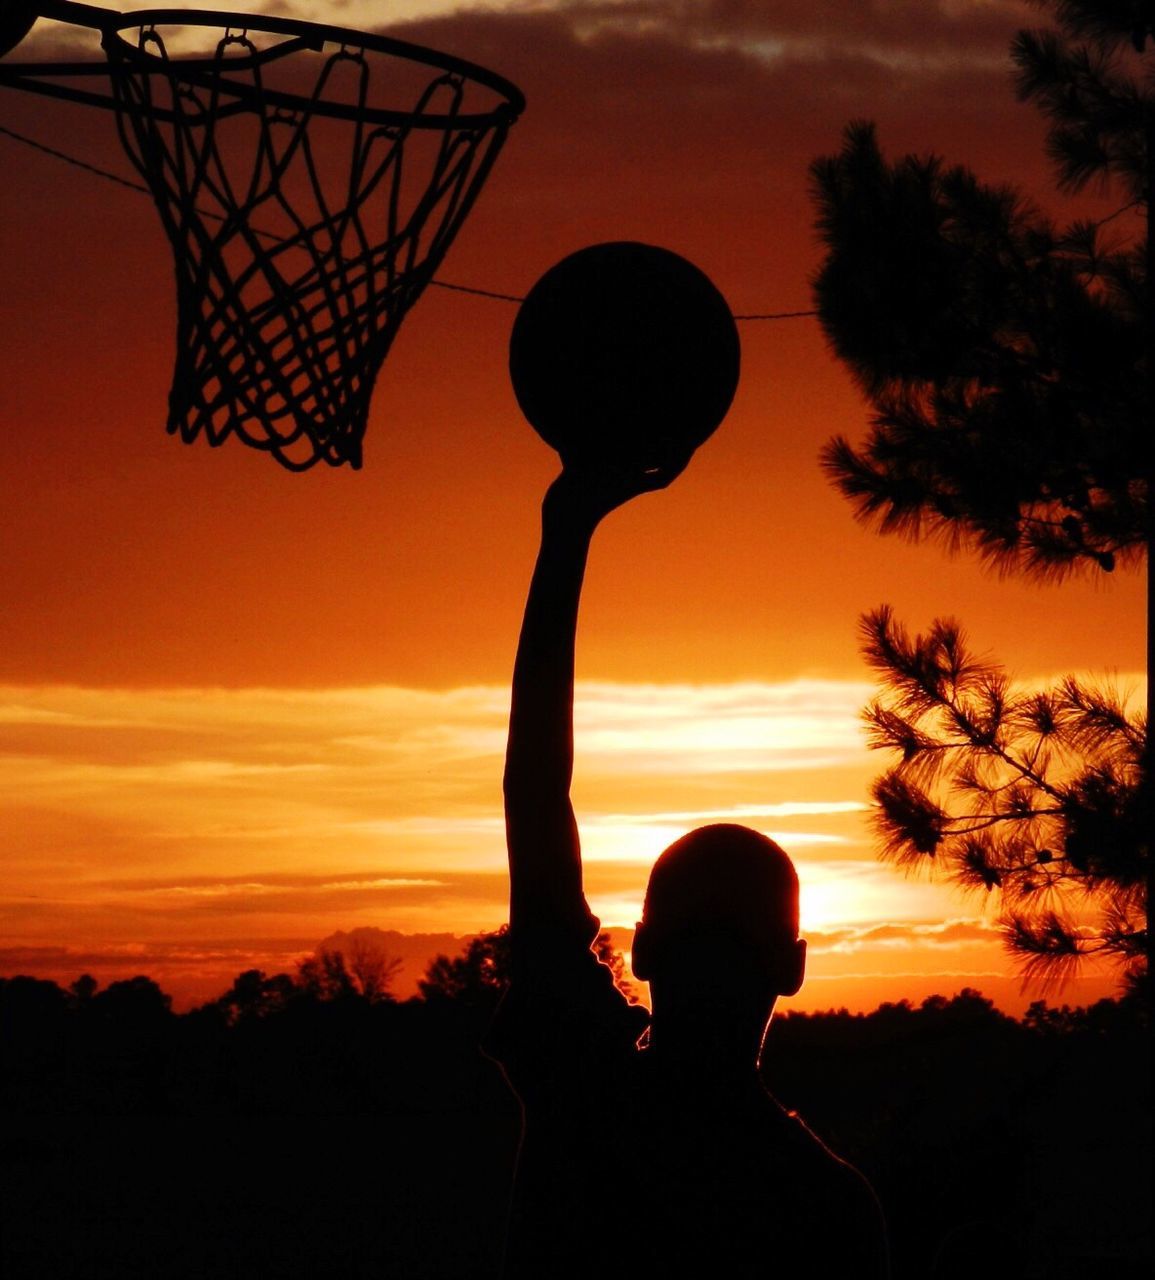 Silhouette man holding basket ball against cloudy sky during sunset